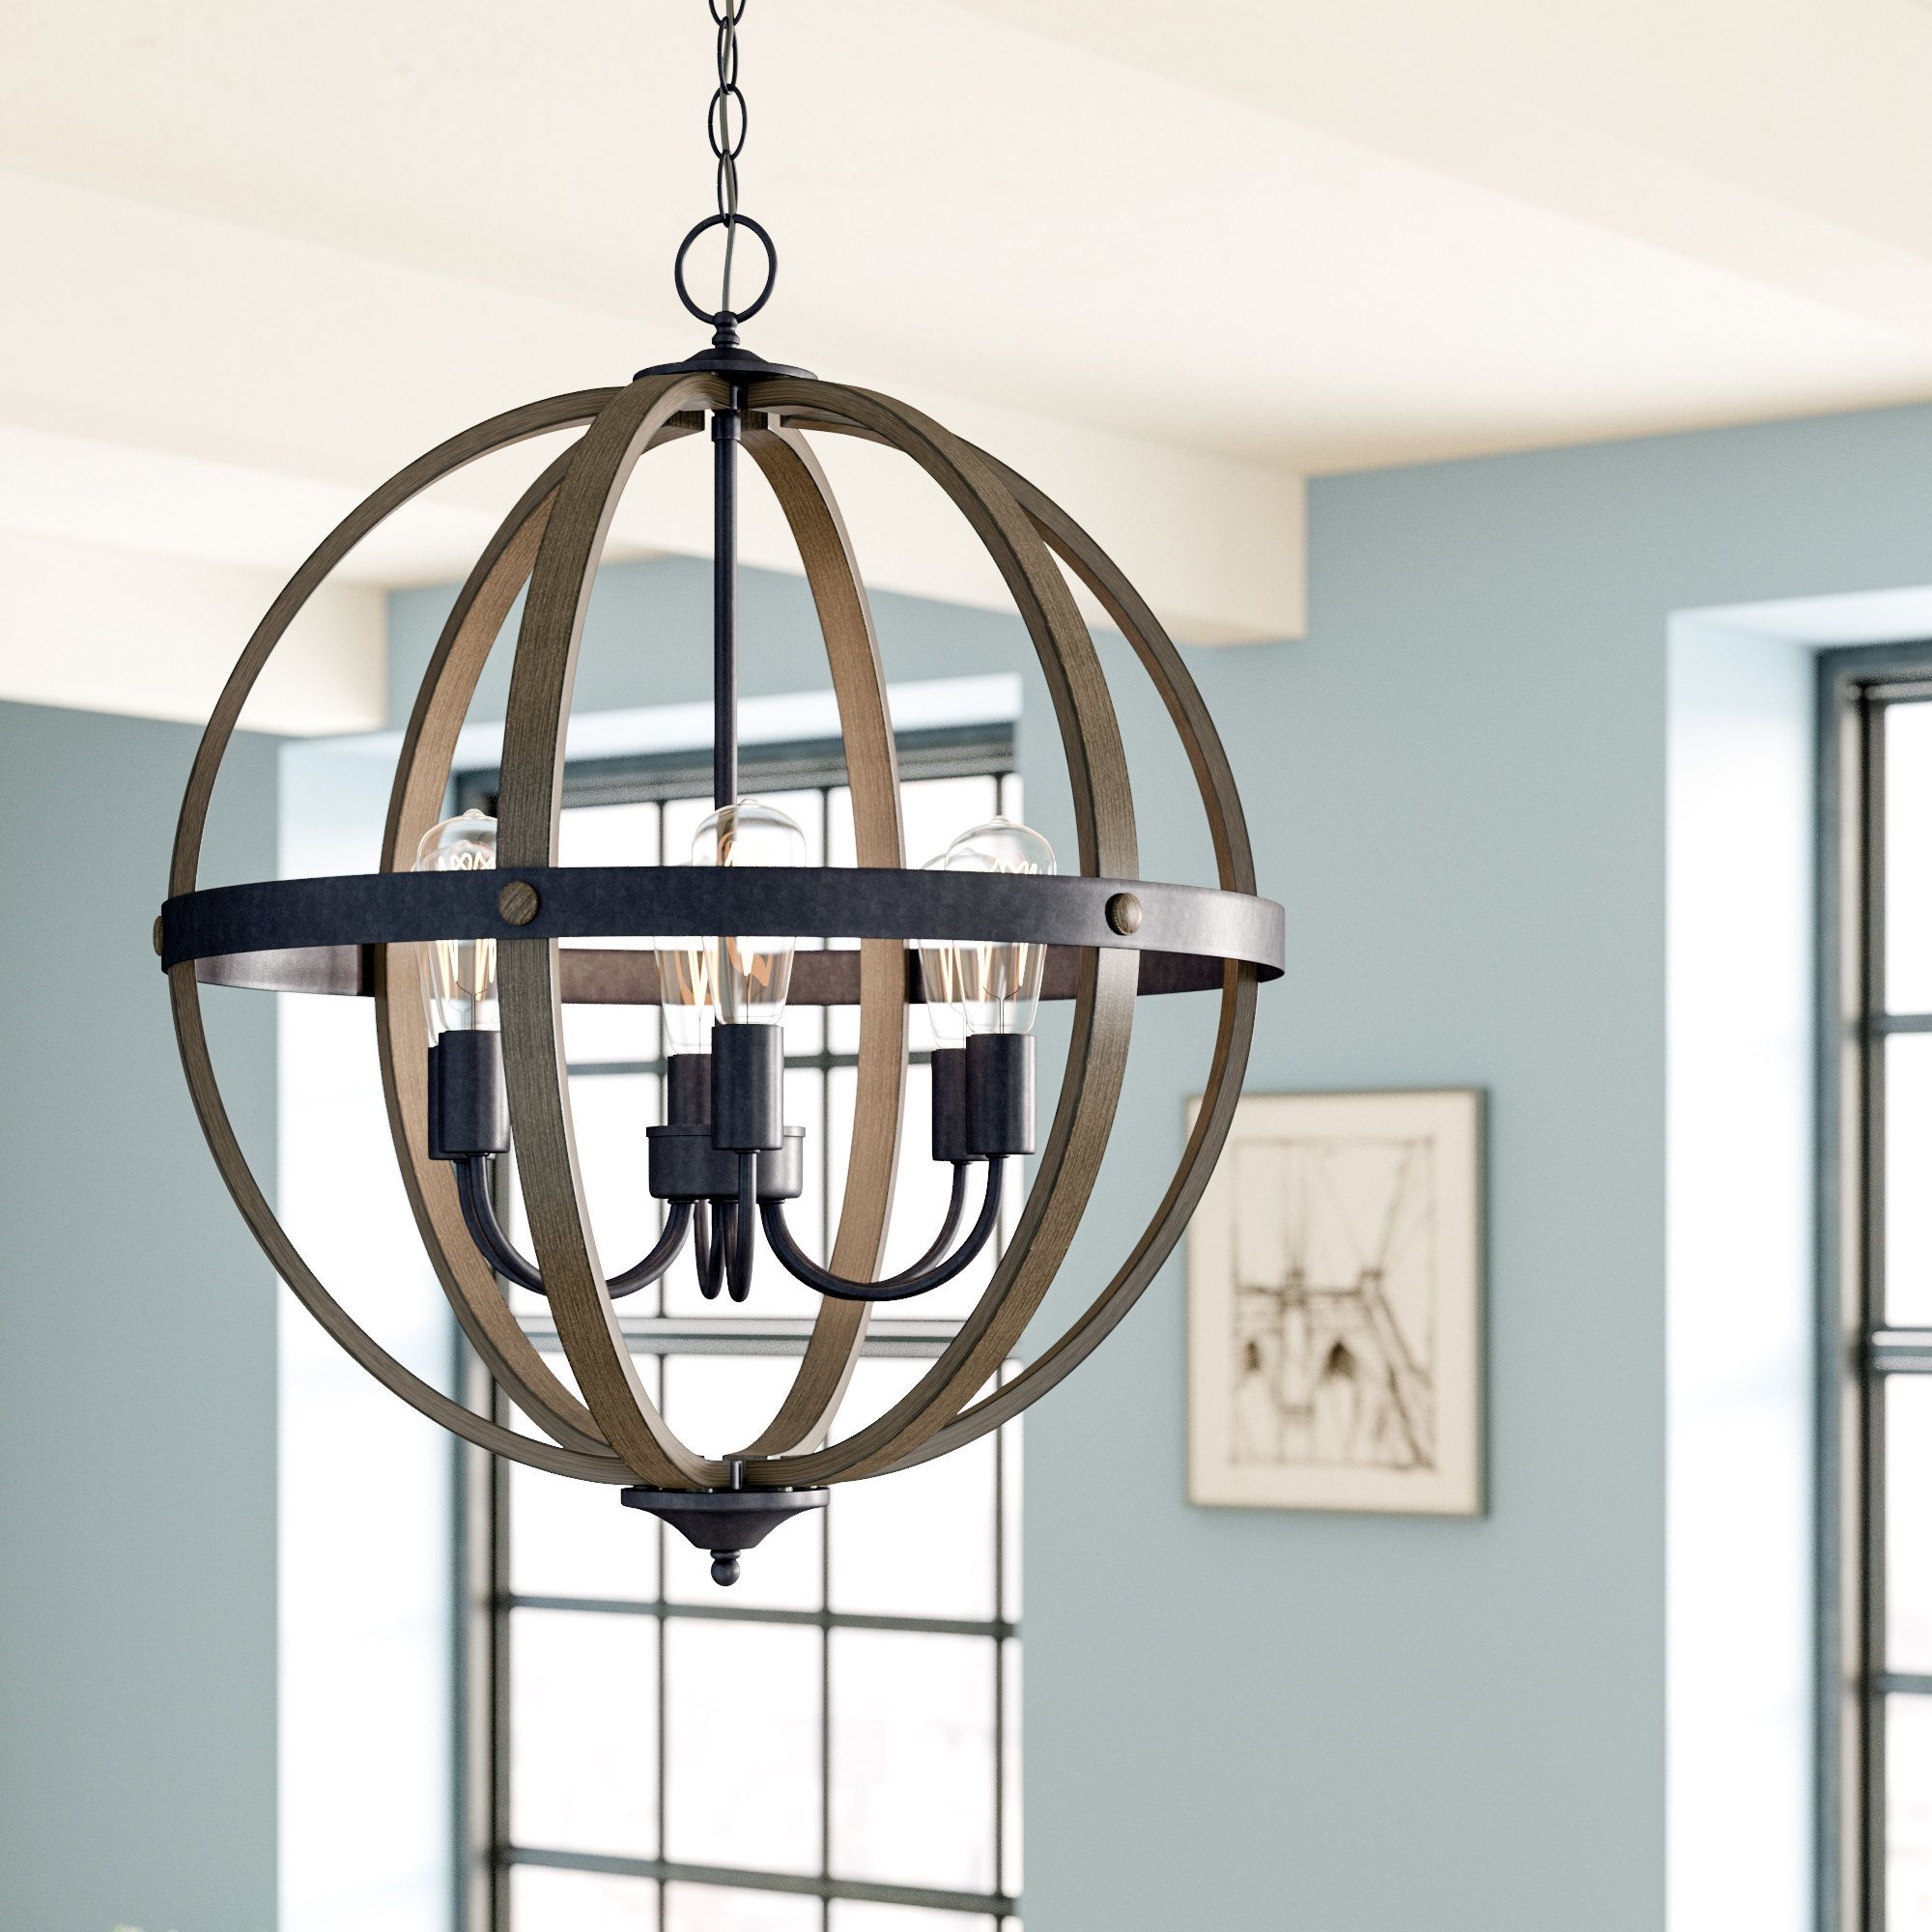 [%globe Chandeliers Sale – Up To 65% Off Until September 30th Pertaining To Preferred Waldron 5 Light Globe Chandeliers|waldron 5 Light Globe Chandeliers In Favorite Globe Chandeliers Sale – Up To 65% Off Until September 30th|preferred Waldron 5 Light Globe Chandeliers Inside Globe Chandeliers Sale – Up To 65% Off Until September 30th|well Known Globe Chandeliers Sale – Up To 65% Off Until September 30th For Waldron 5 Light Globe Chandeliers%] (Photo 22 of 25)